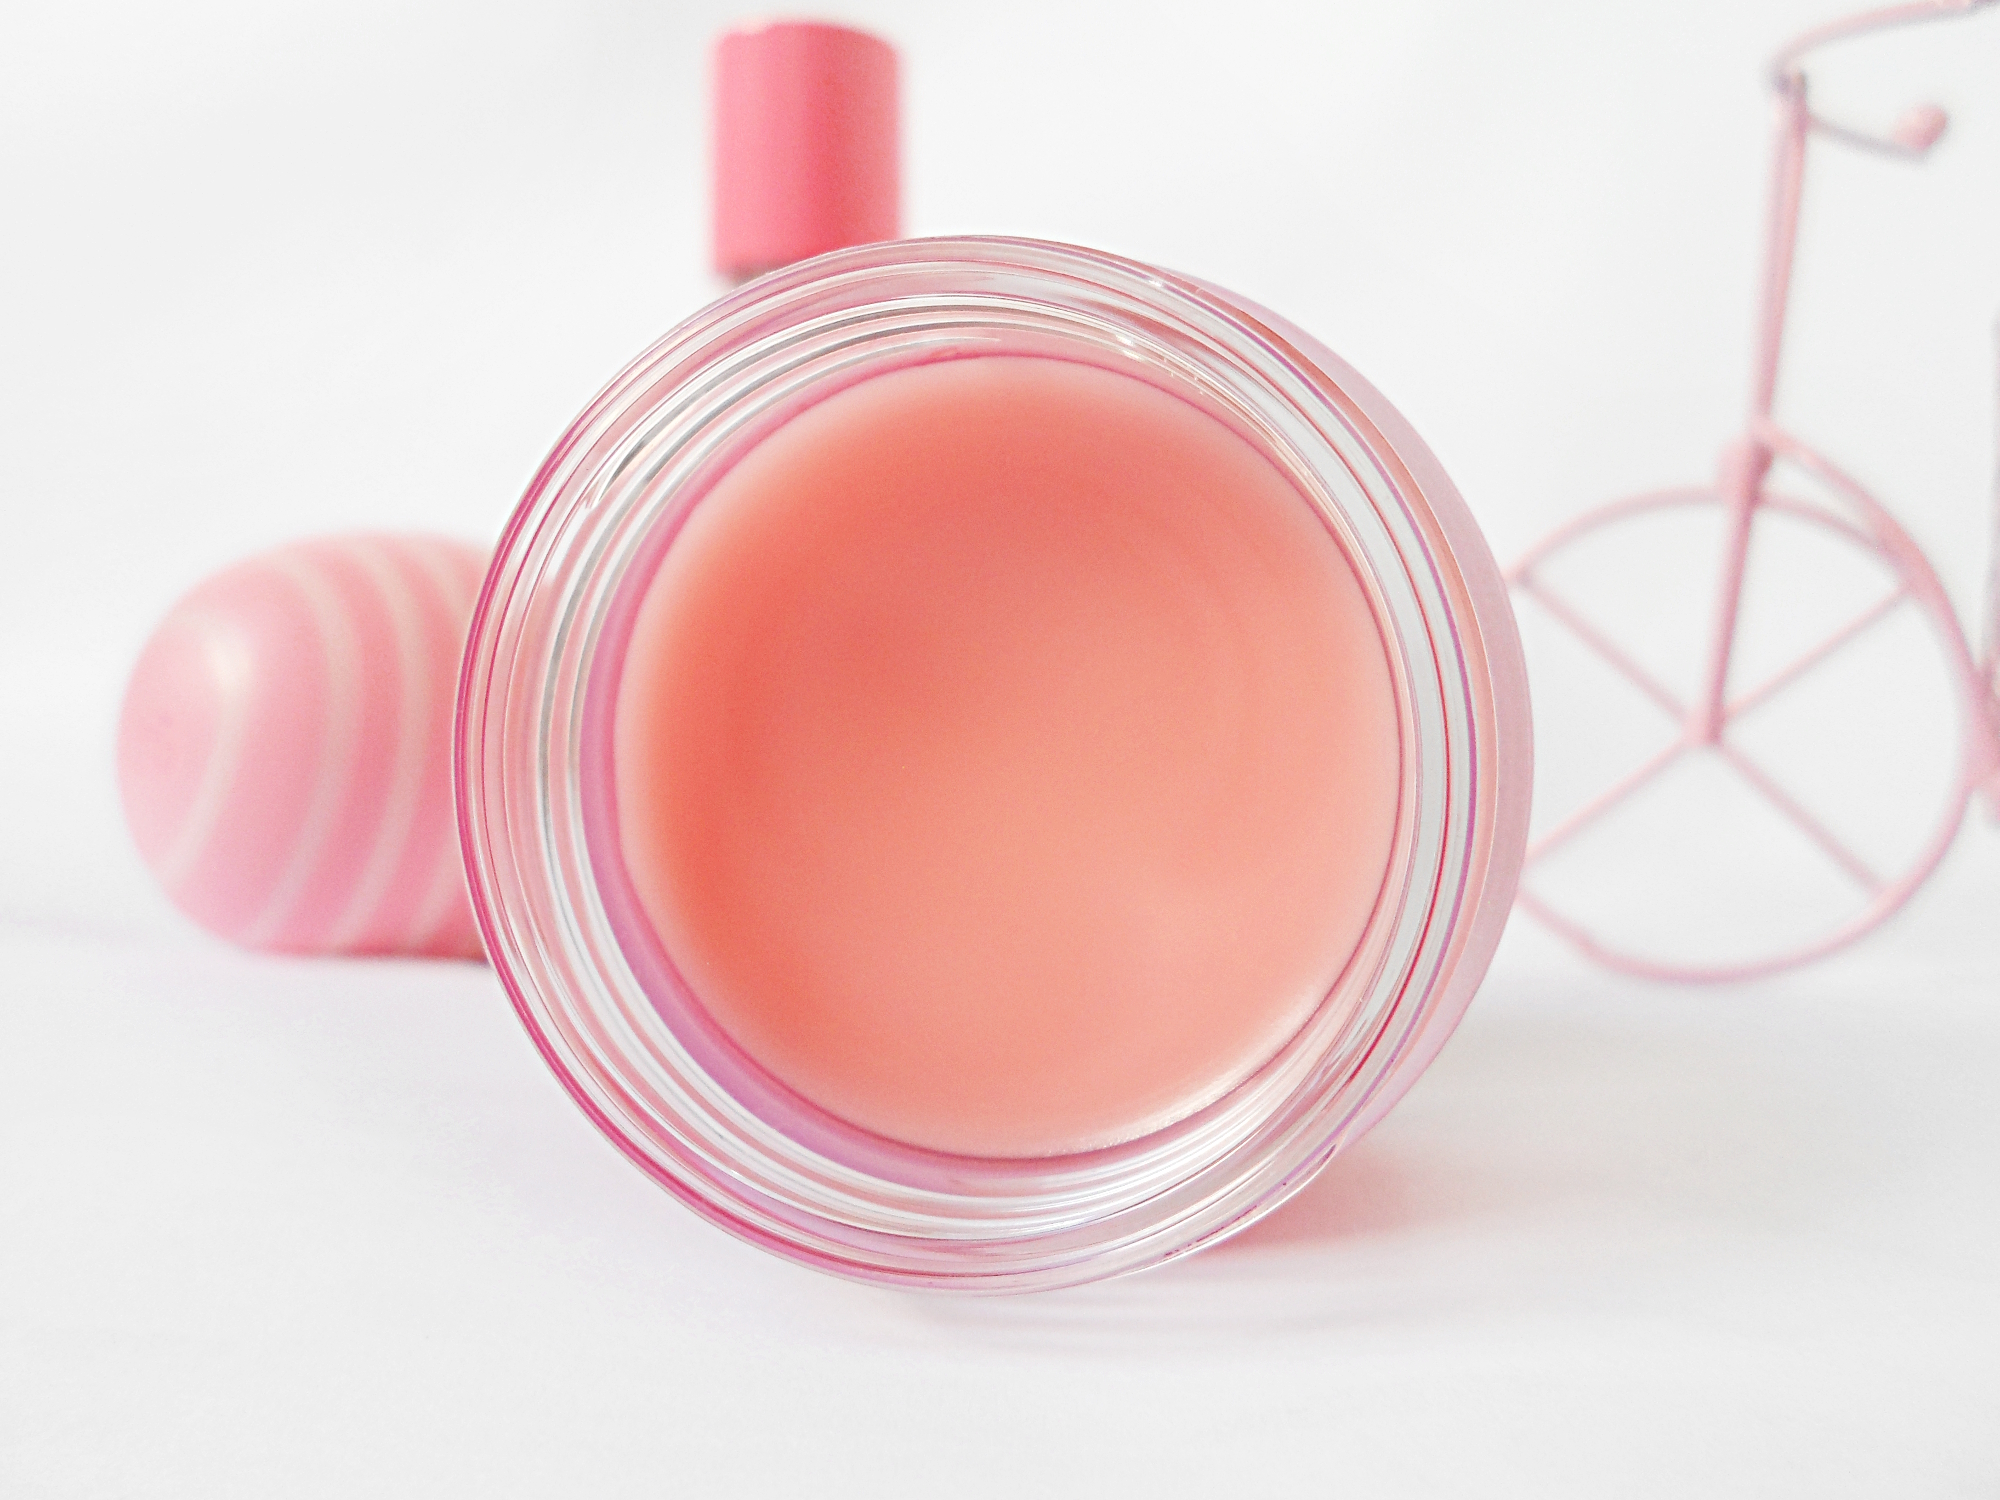 a close-up of a lip care mask by laneige brand laying on a white background in a studio